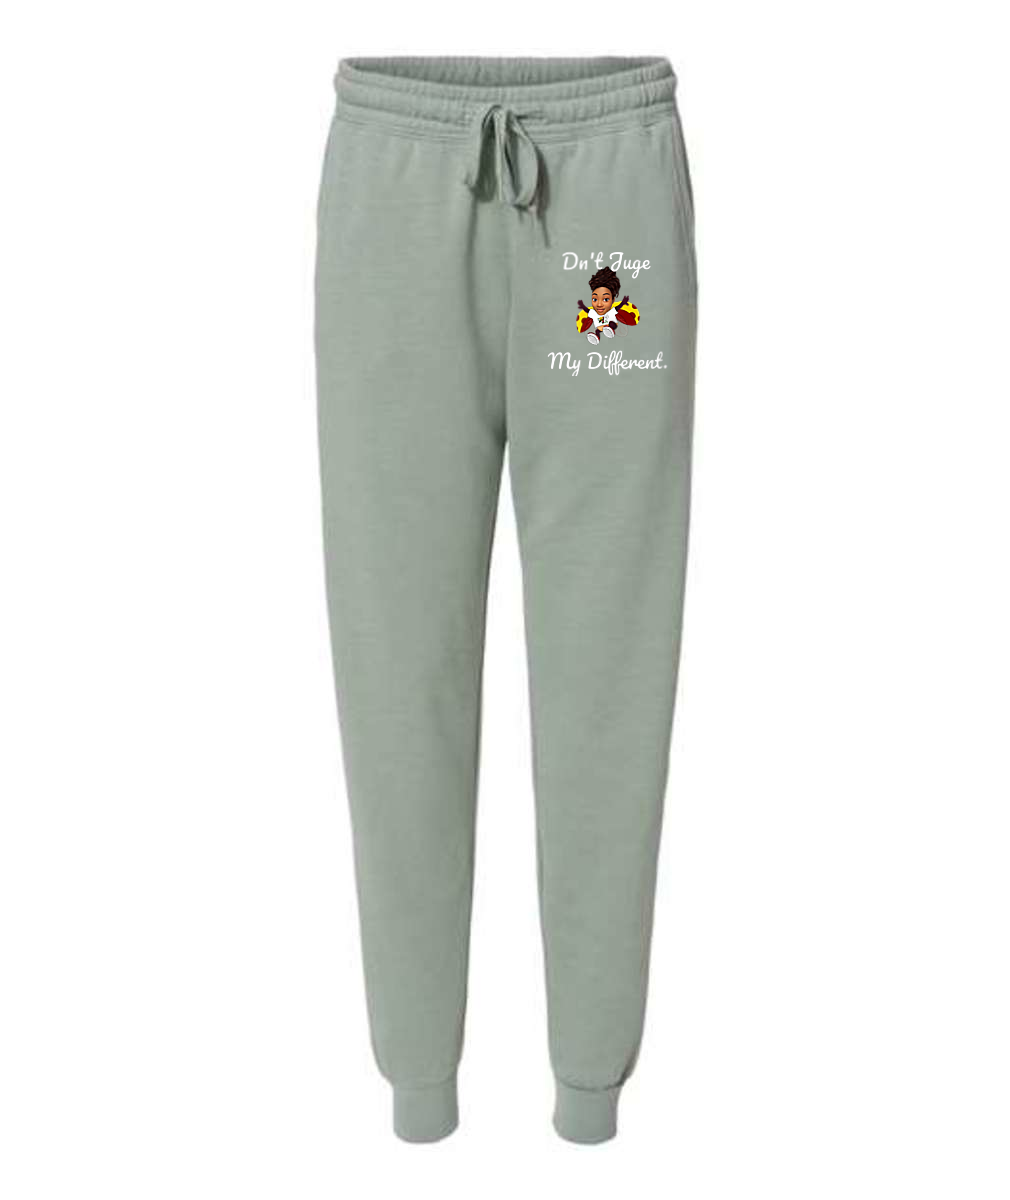 Dn't Juge My Different Embroidered Independent Trading Co. - Women's California Wave Wash Sweatpants or Similar